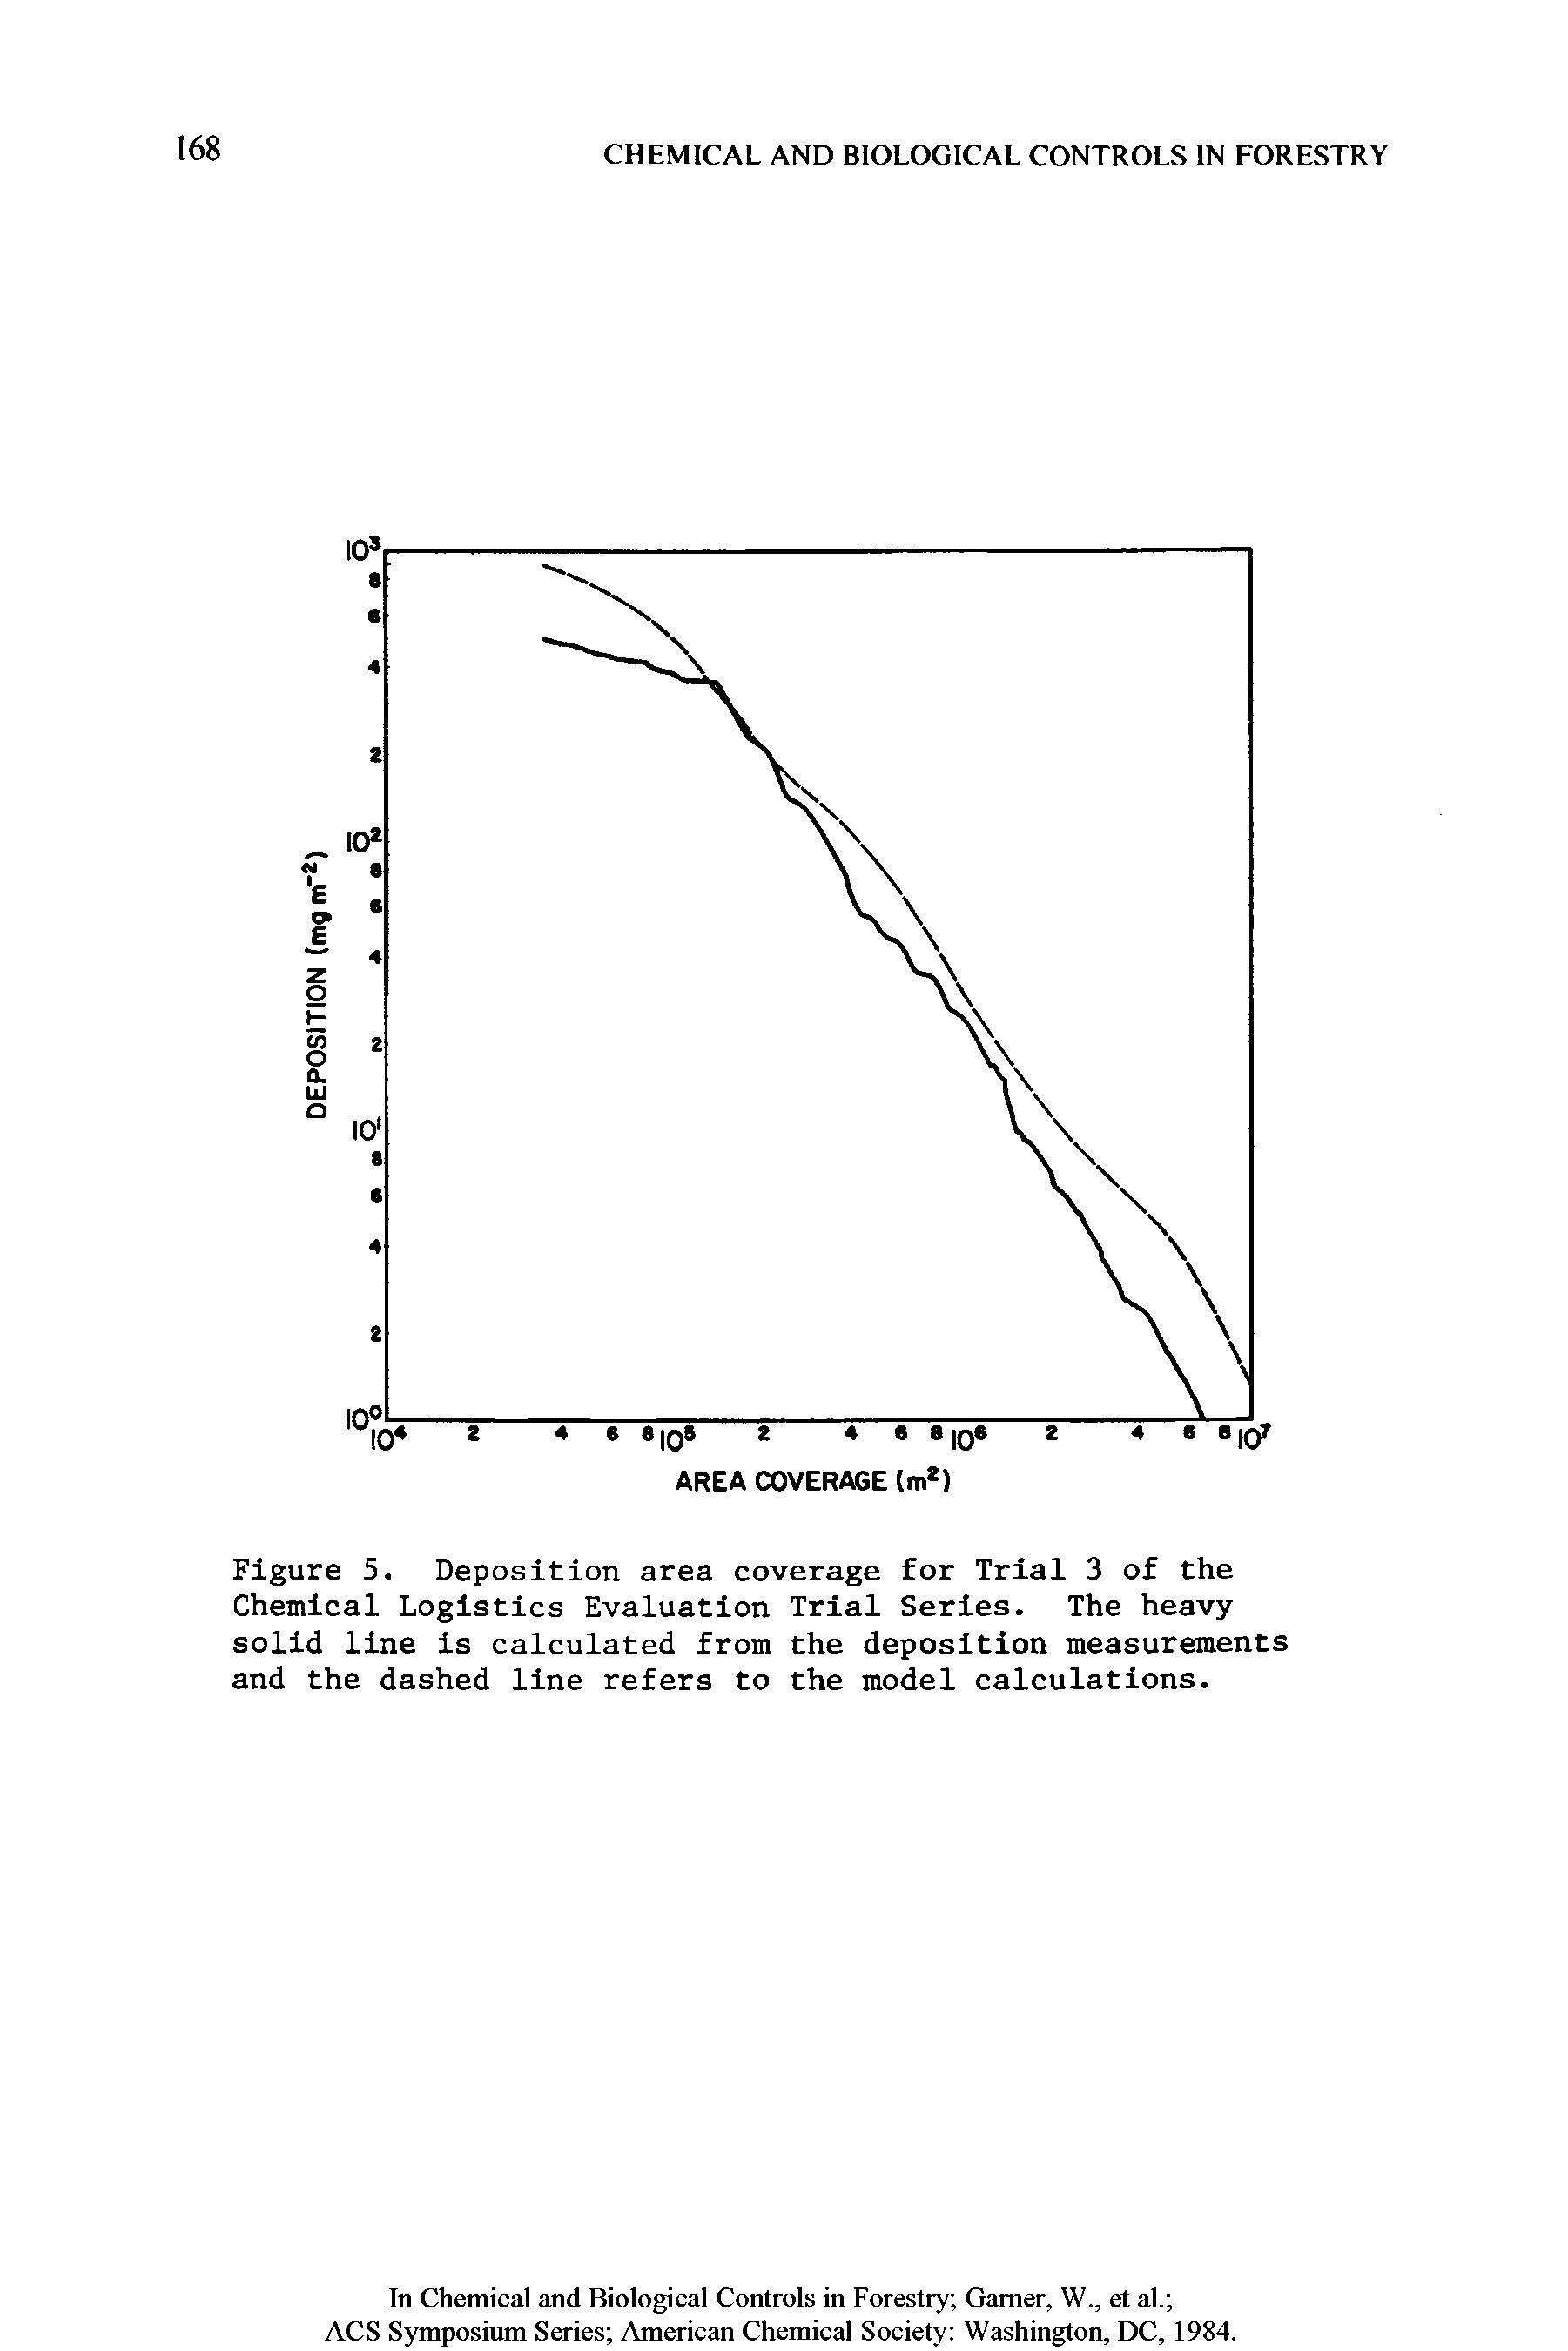 Figure 5. Deposition area coverage for Trial 3 of the Chemical Logistics Evaluation Trial Series. The heavy solid line is calculated from the deposition measurements and the dashed line refers to the model calculations.